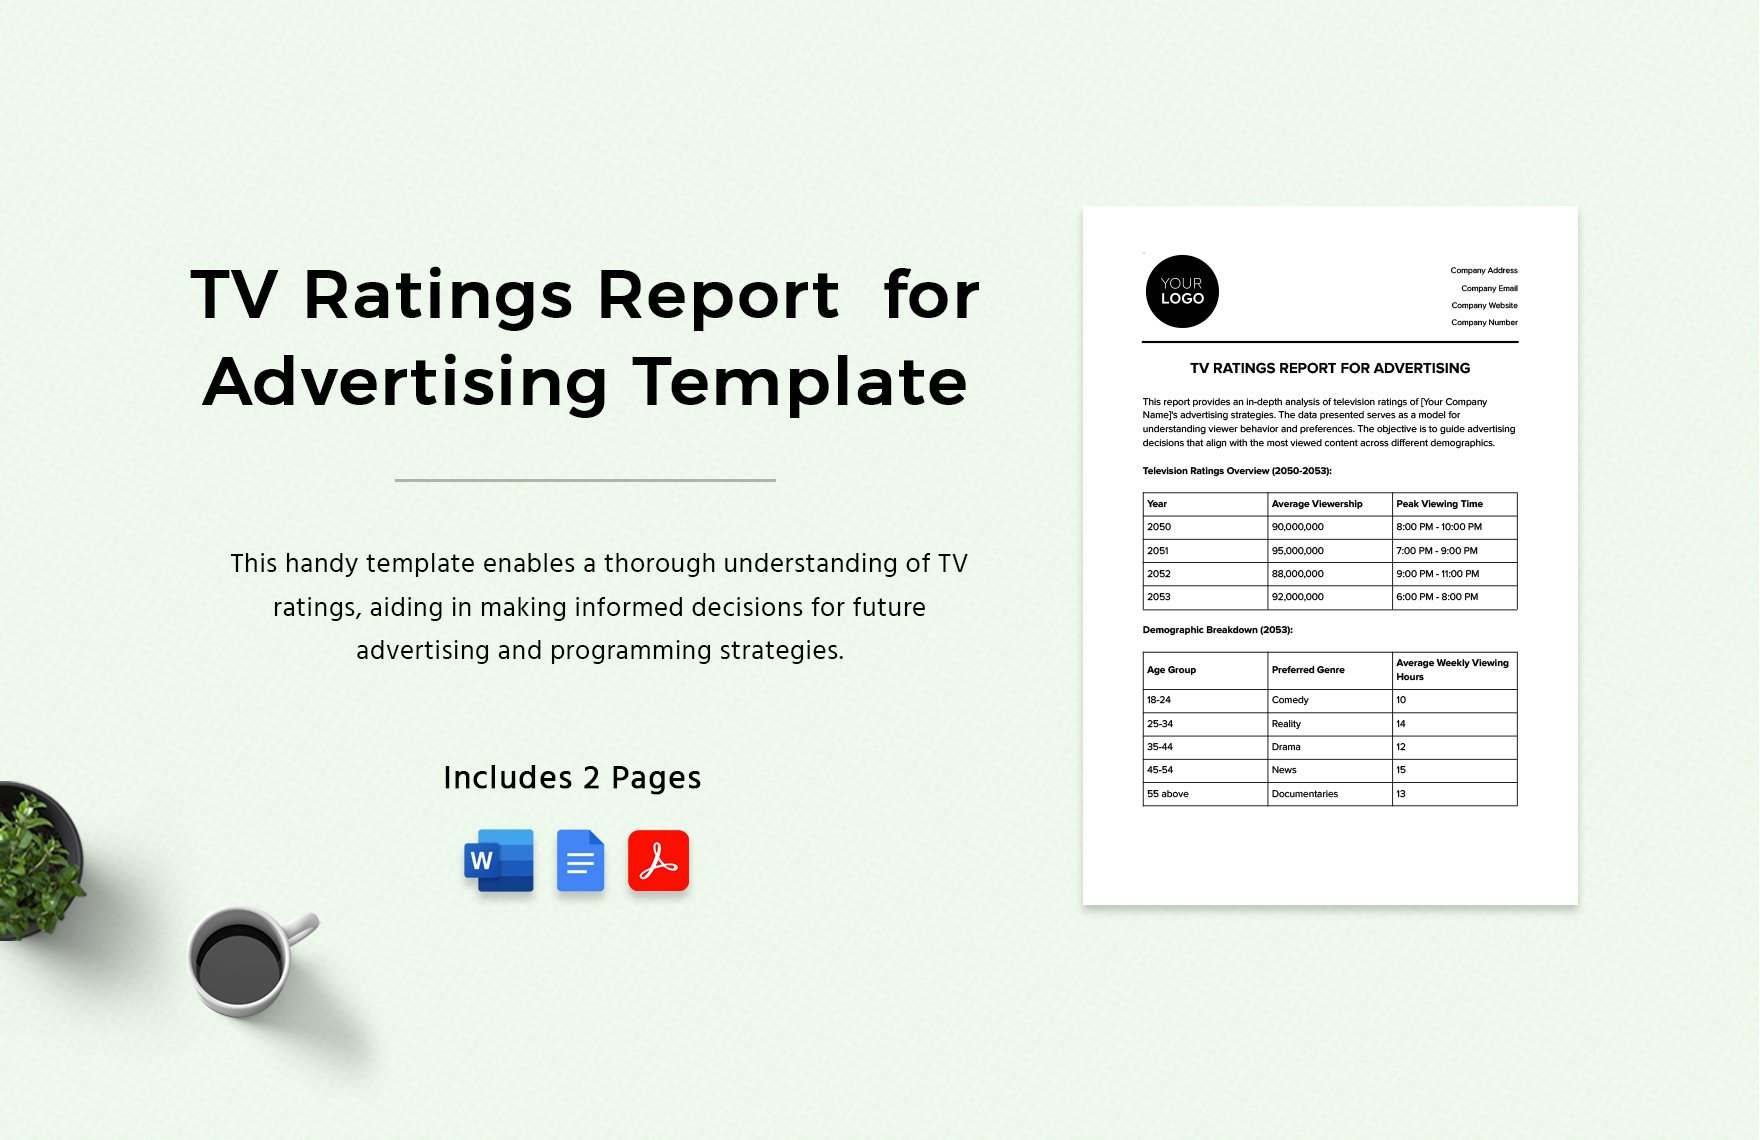 TV Ratings Report for Advertising Template